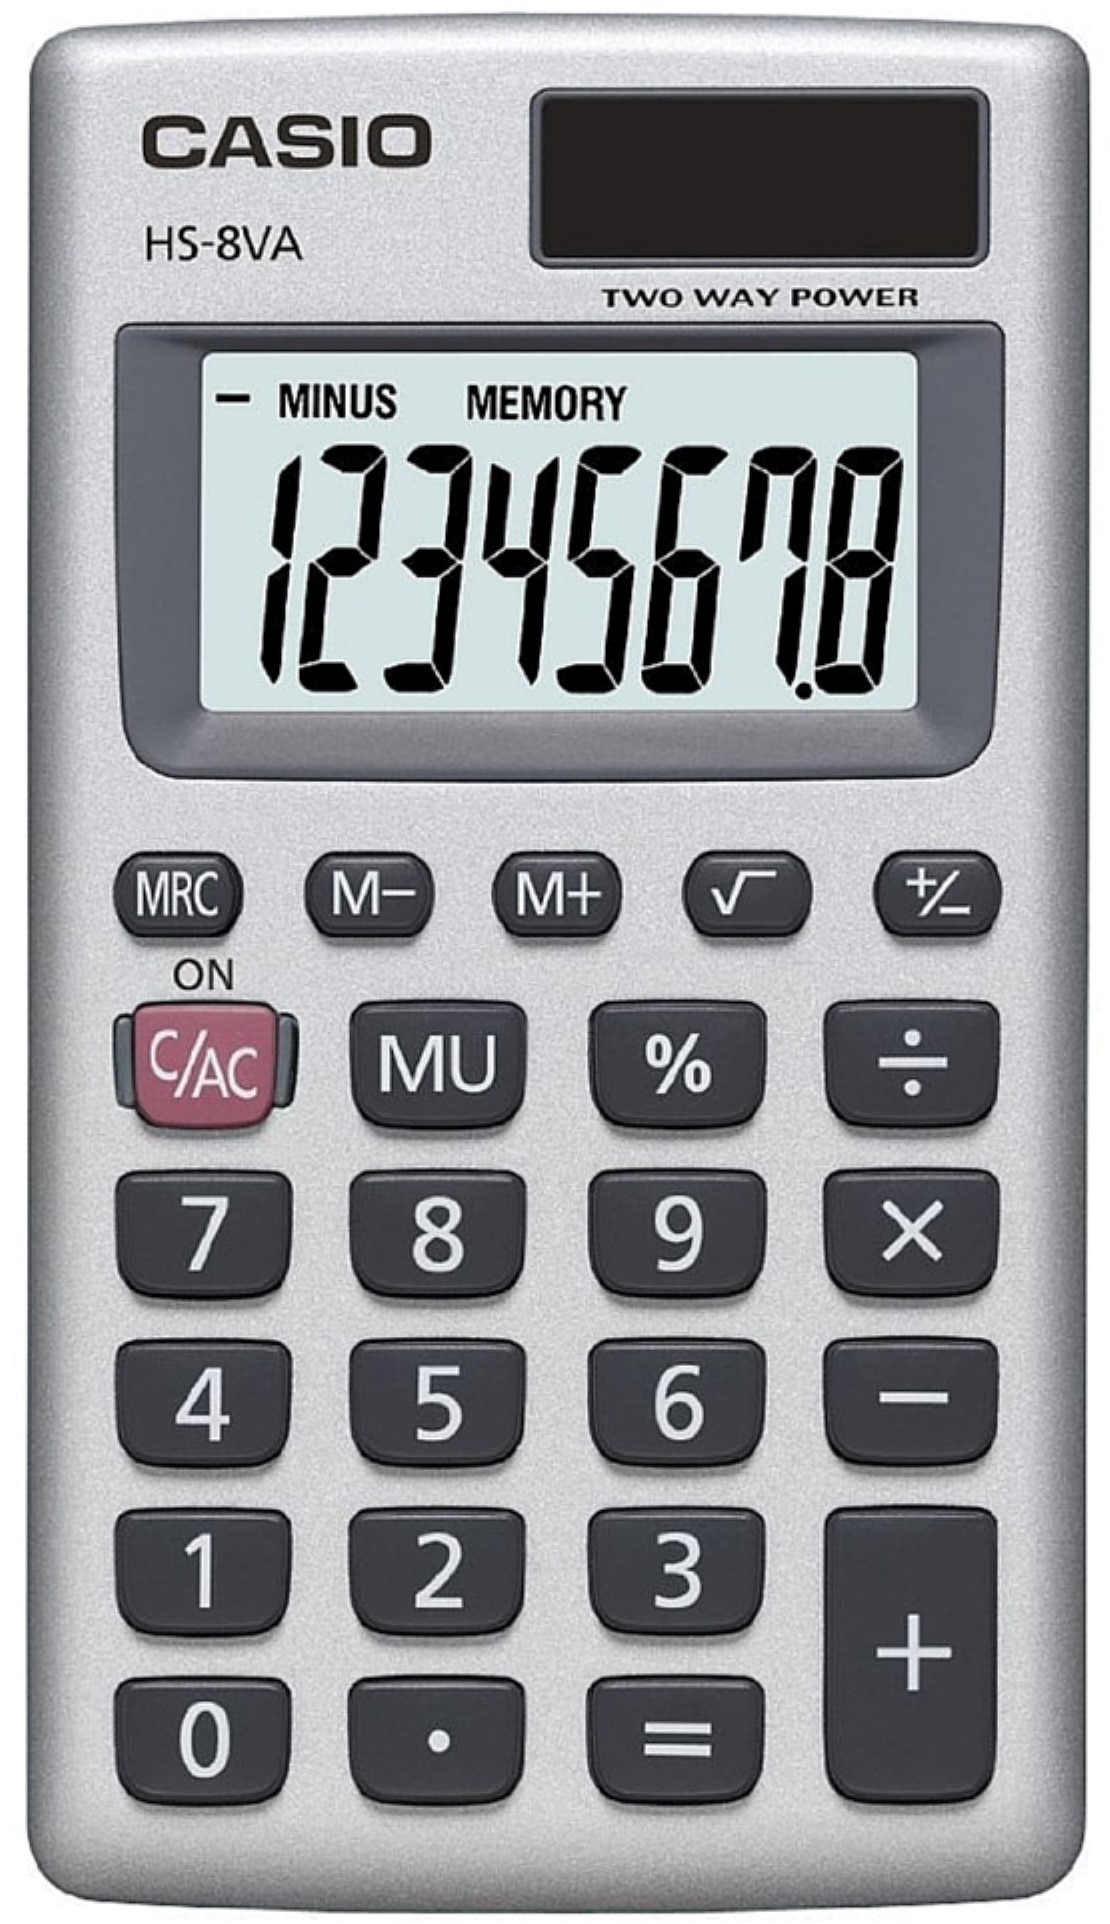 Battery and Solar Power The CASIO HS-8VE calculator operates in well-lit  areas using solar cell while in other light settings using battery power.  The